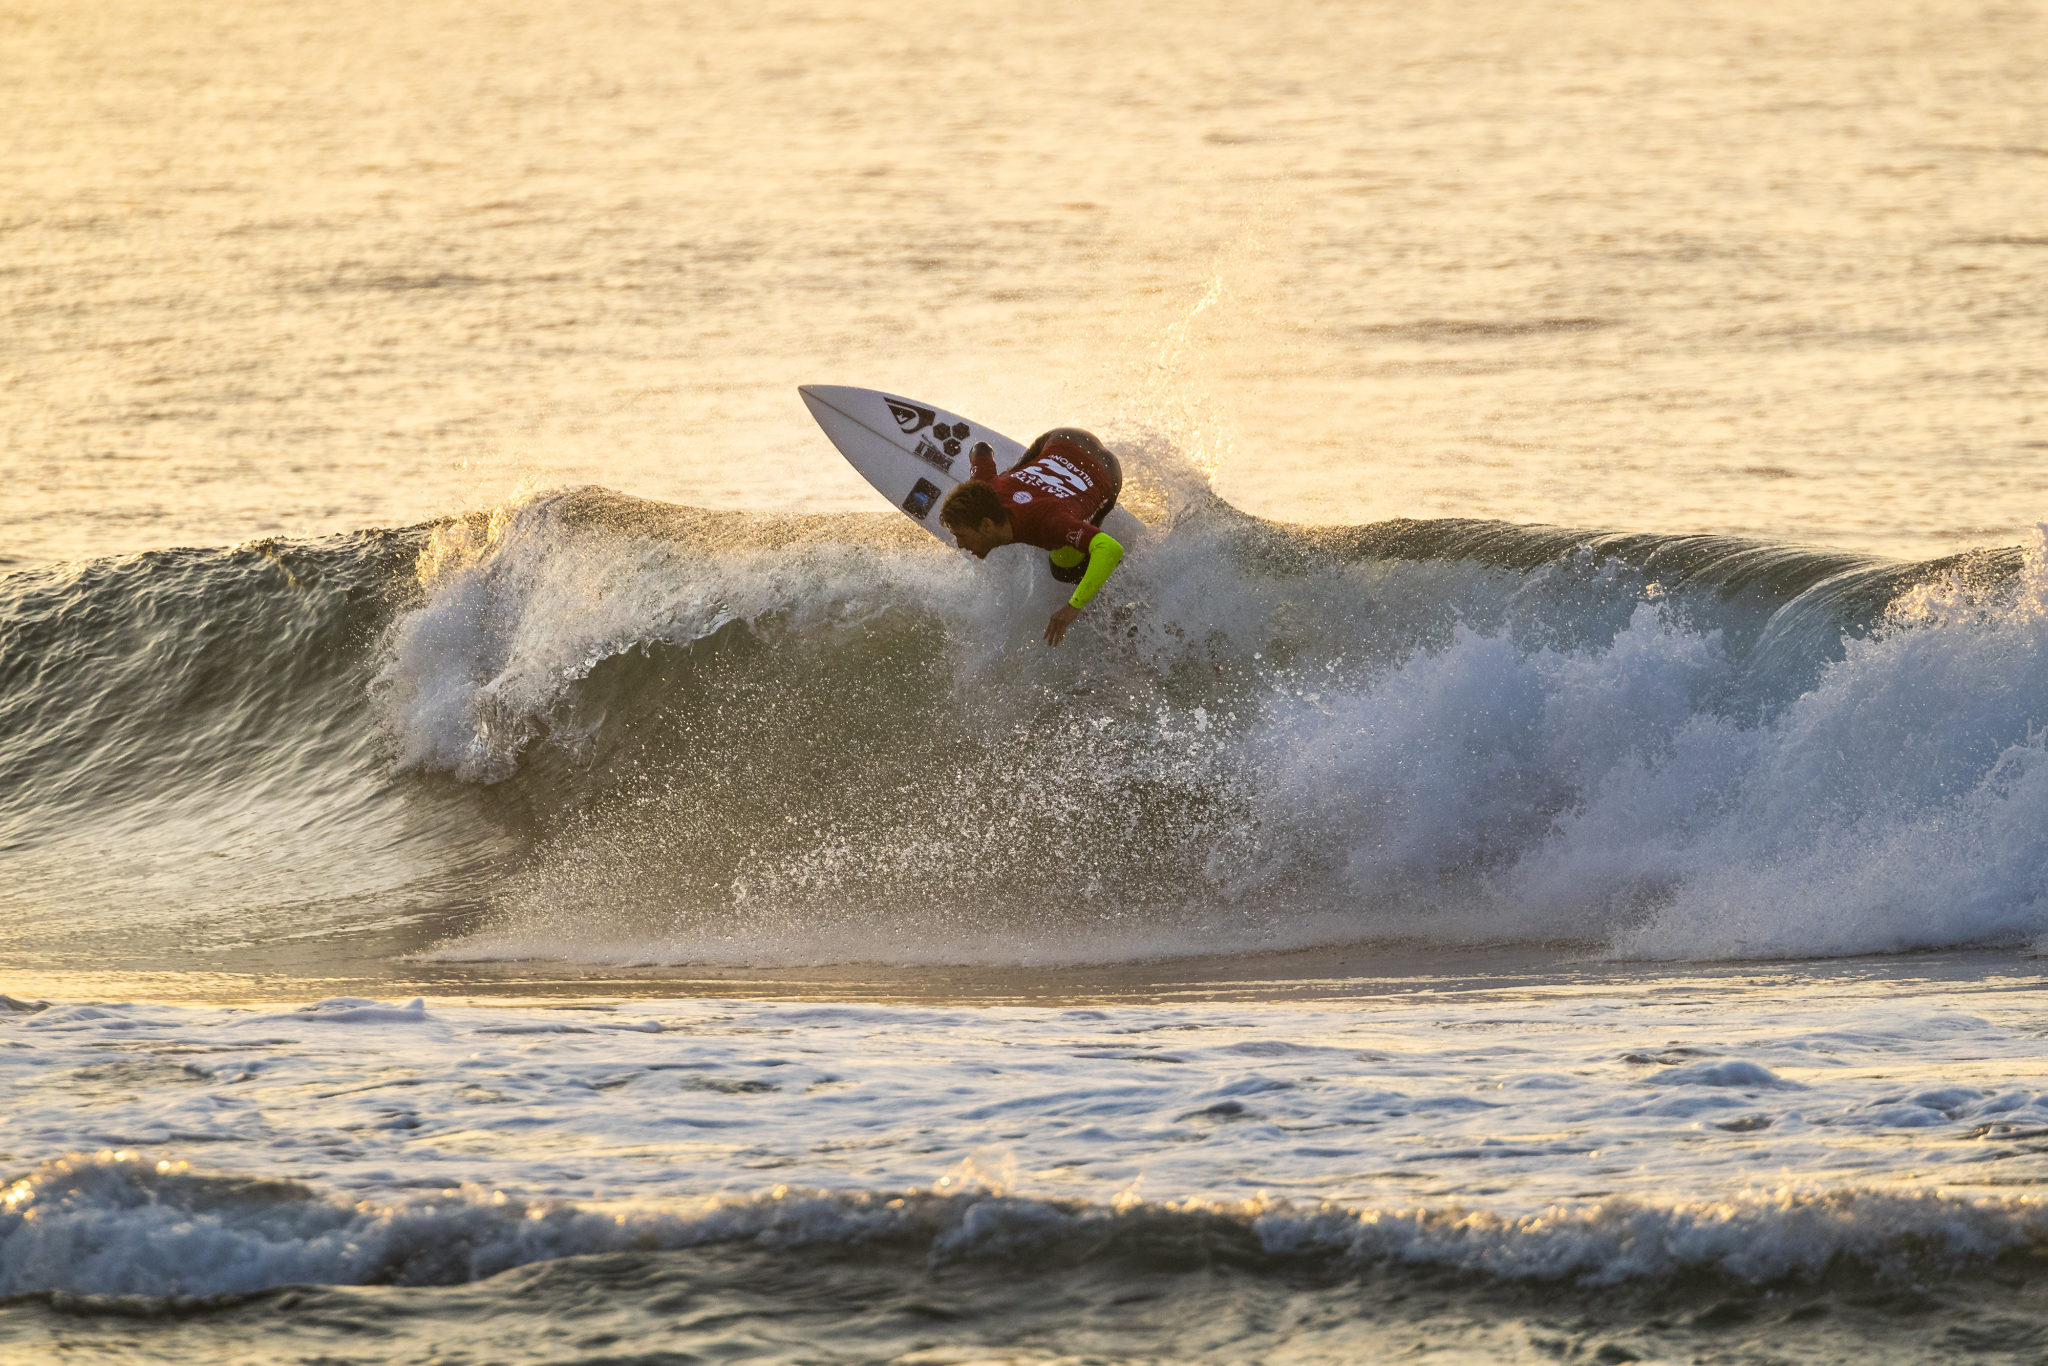 Jesse Mendes (BRA) advances to Round 3 of the 2018 Ballito Pro pres by Billabong after placing second in Heat 9 of Round 2 at Ballito, South Africa.